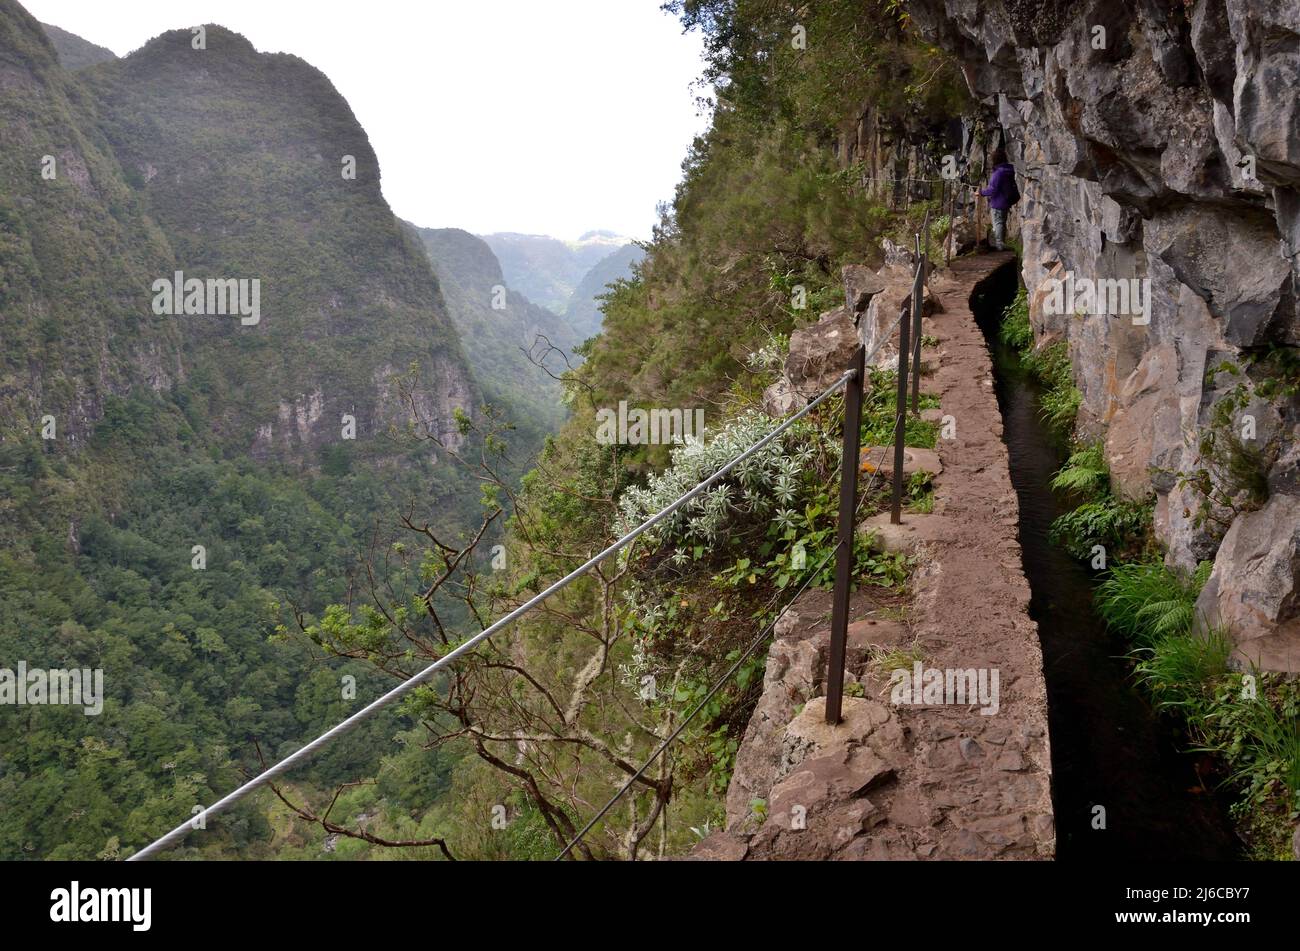 A Levada (irrigation channel) and narrow path on a very steep mountainside in Madeira, Portugal. Stock Photo